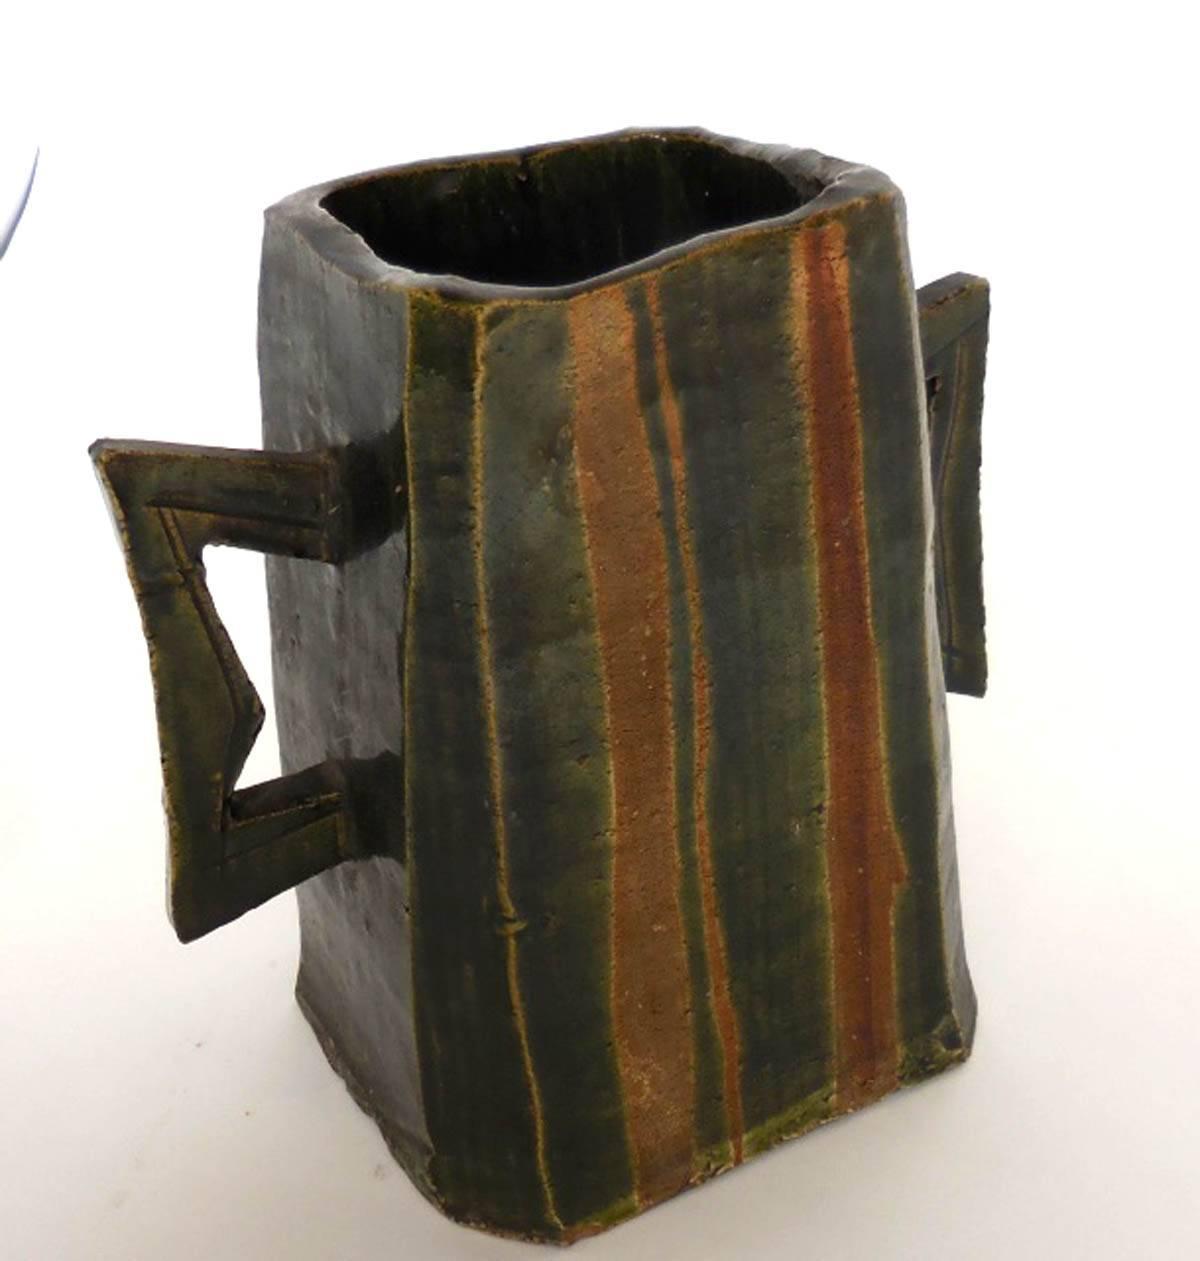 Mid-20th century art pottery vessel, signed by the artist. Green is the overglaze and the orange is the unglazed pottery beneath it. It is in great condition! It's cool and geometric!
 